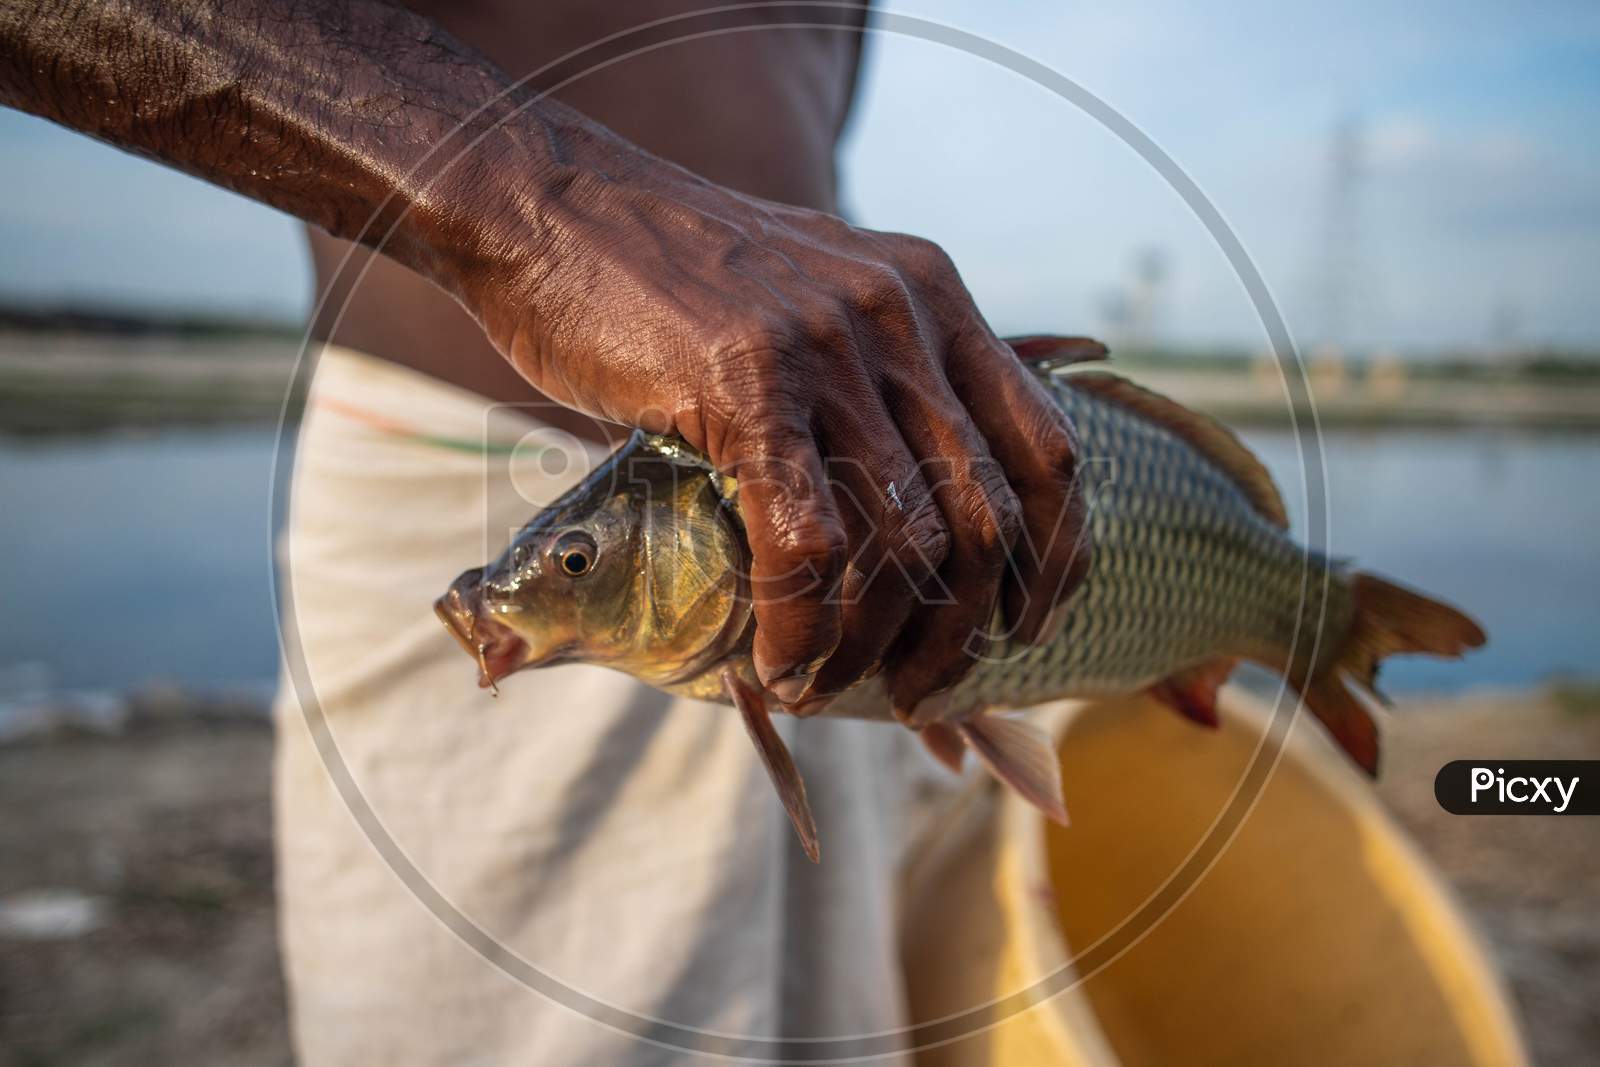 Indian Fisherman Holds A Fish Caught From The Polluted Water Of The Yamuna River On July 30, 2020 In New Delhi, India.